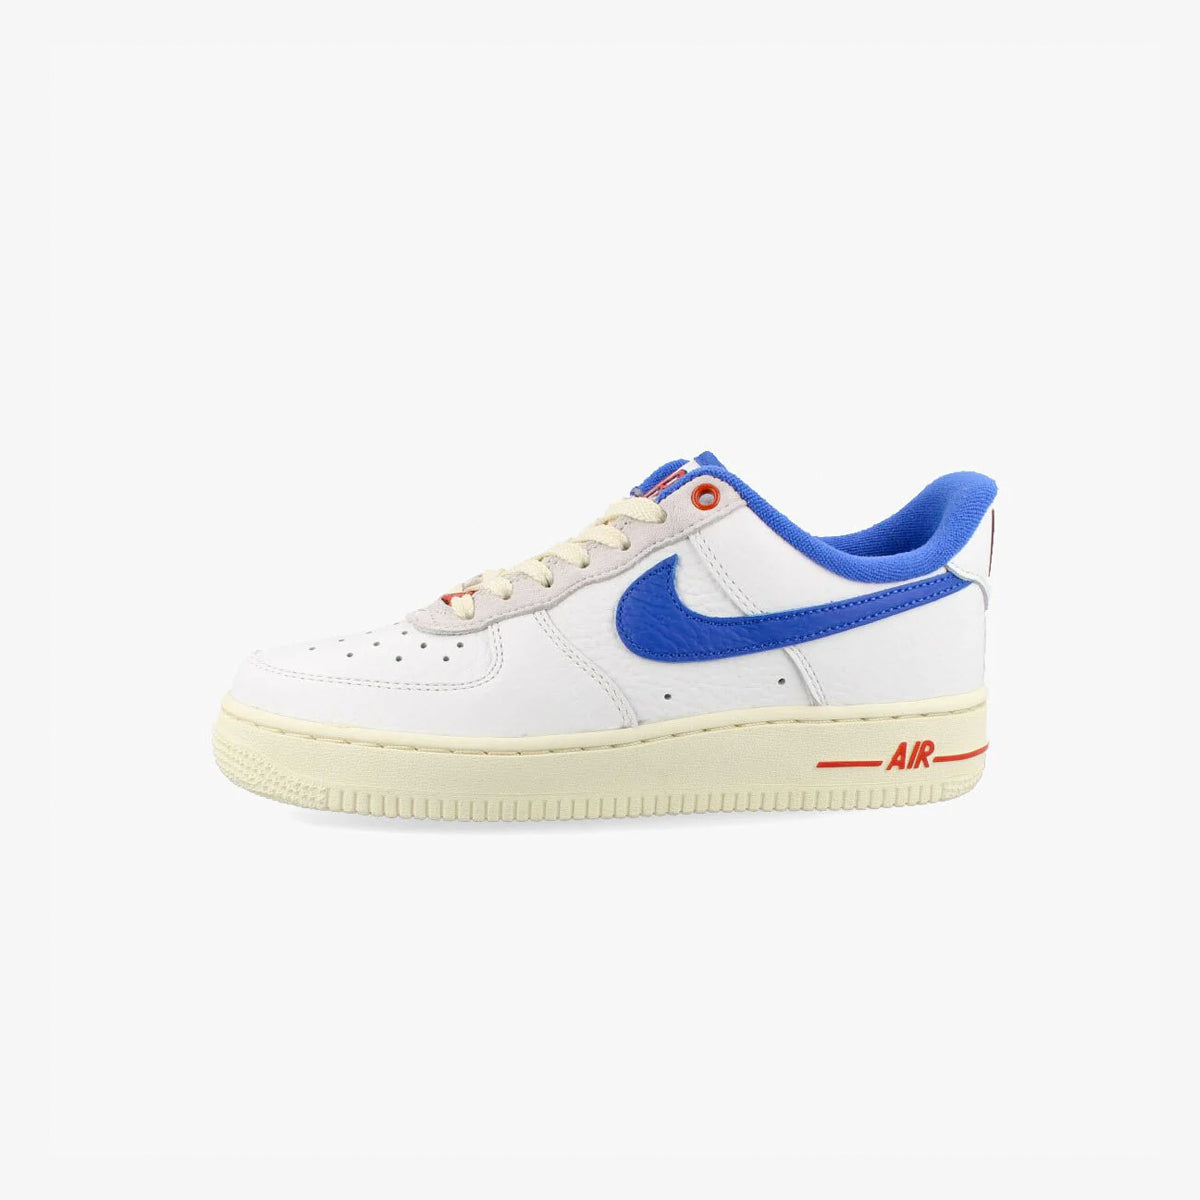 NIKE WMNS AIR FORCE 1 '07 LX SUMMIT WHITE/HYPER ROYAL/PICANTE RED 